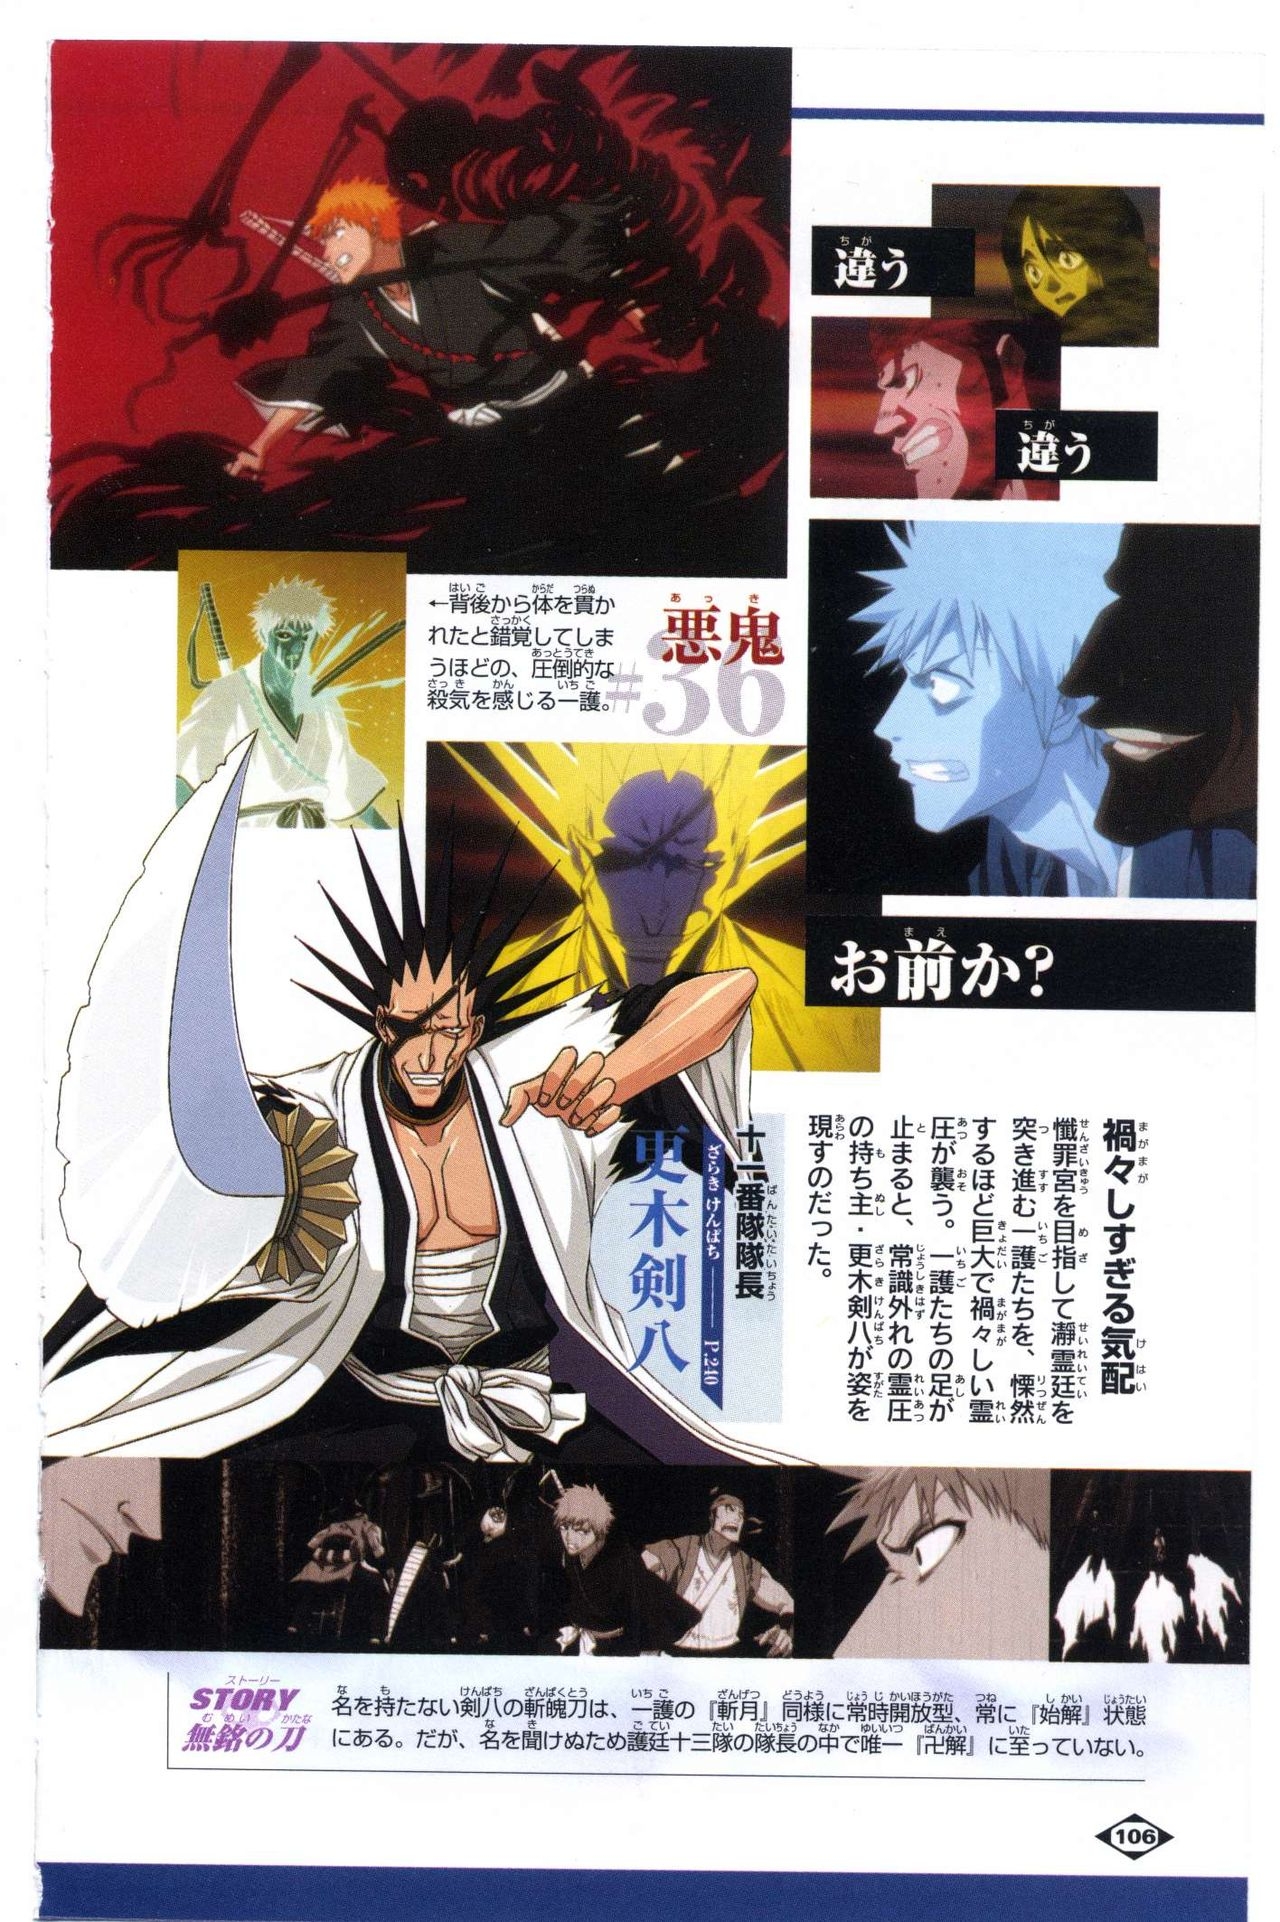 Bleach: Official Animation Book VIBEs 106